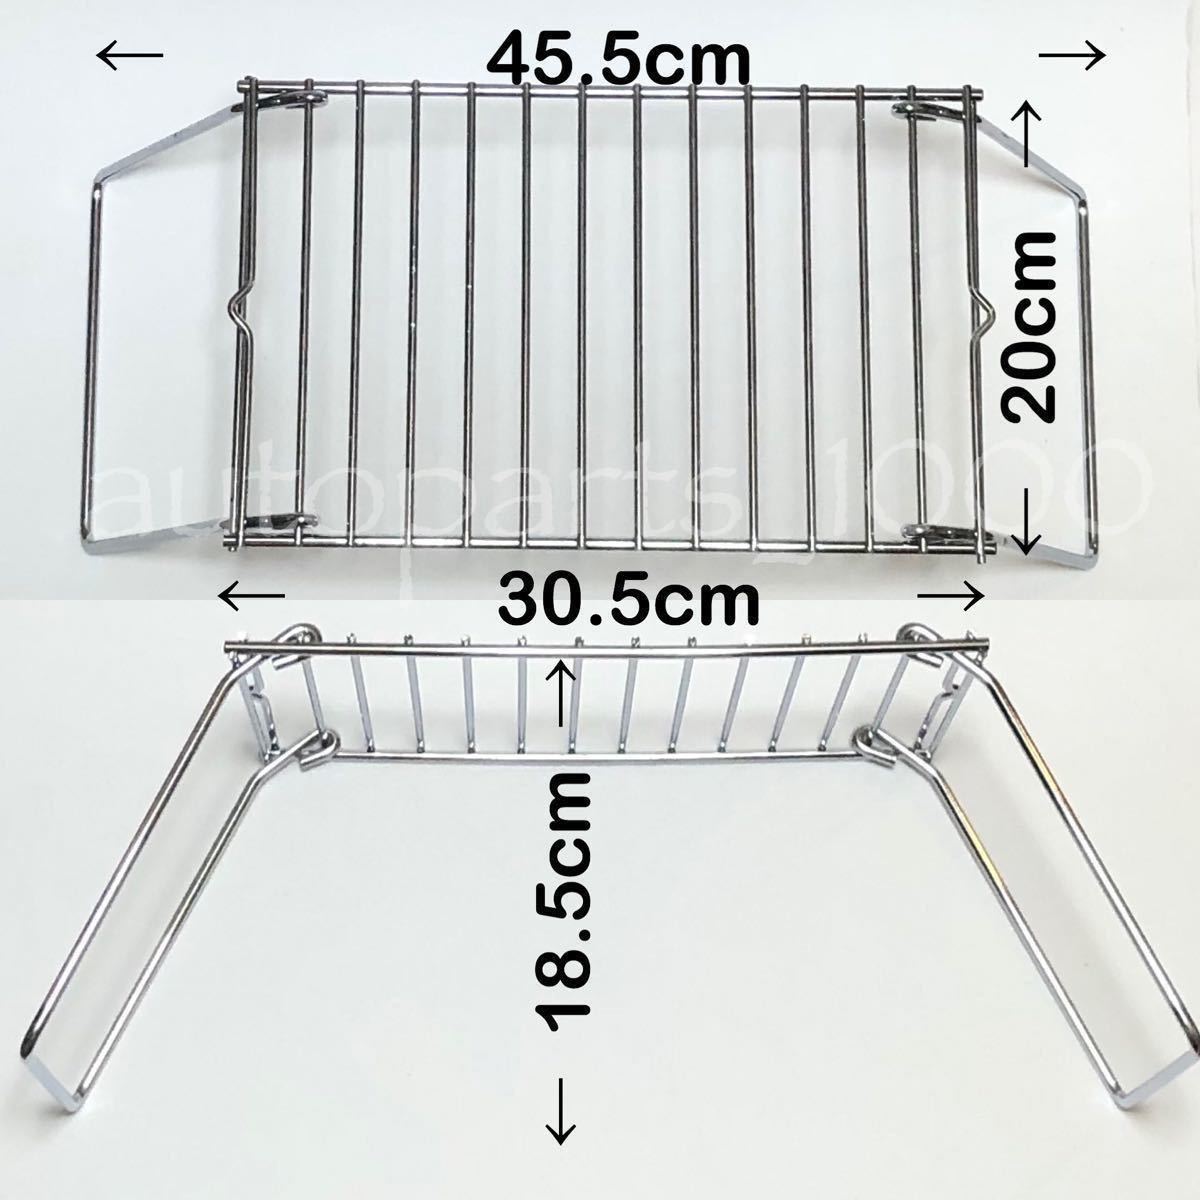  compact folding stand wide BBQ grill trivet cooker stand convenience goods Mini table 